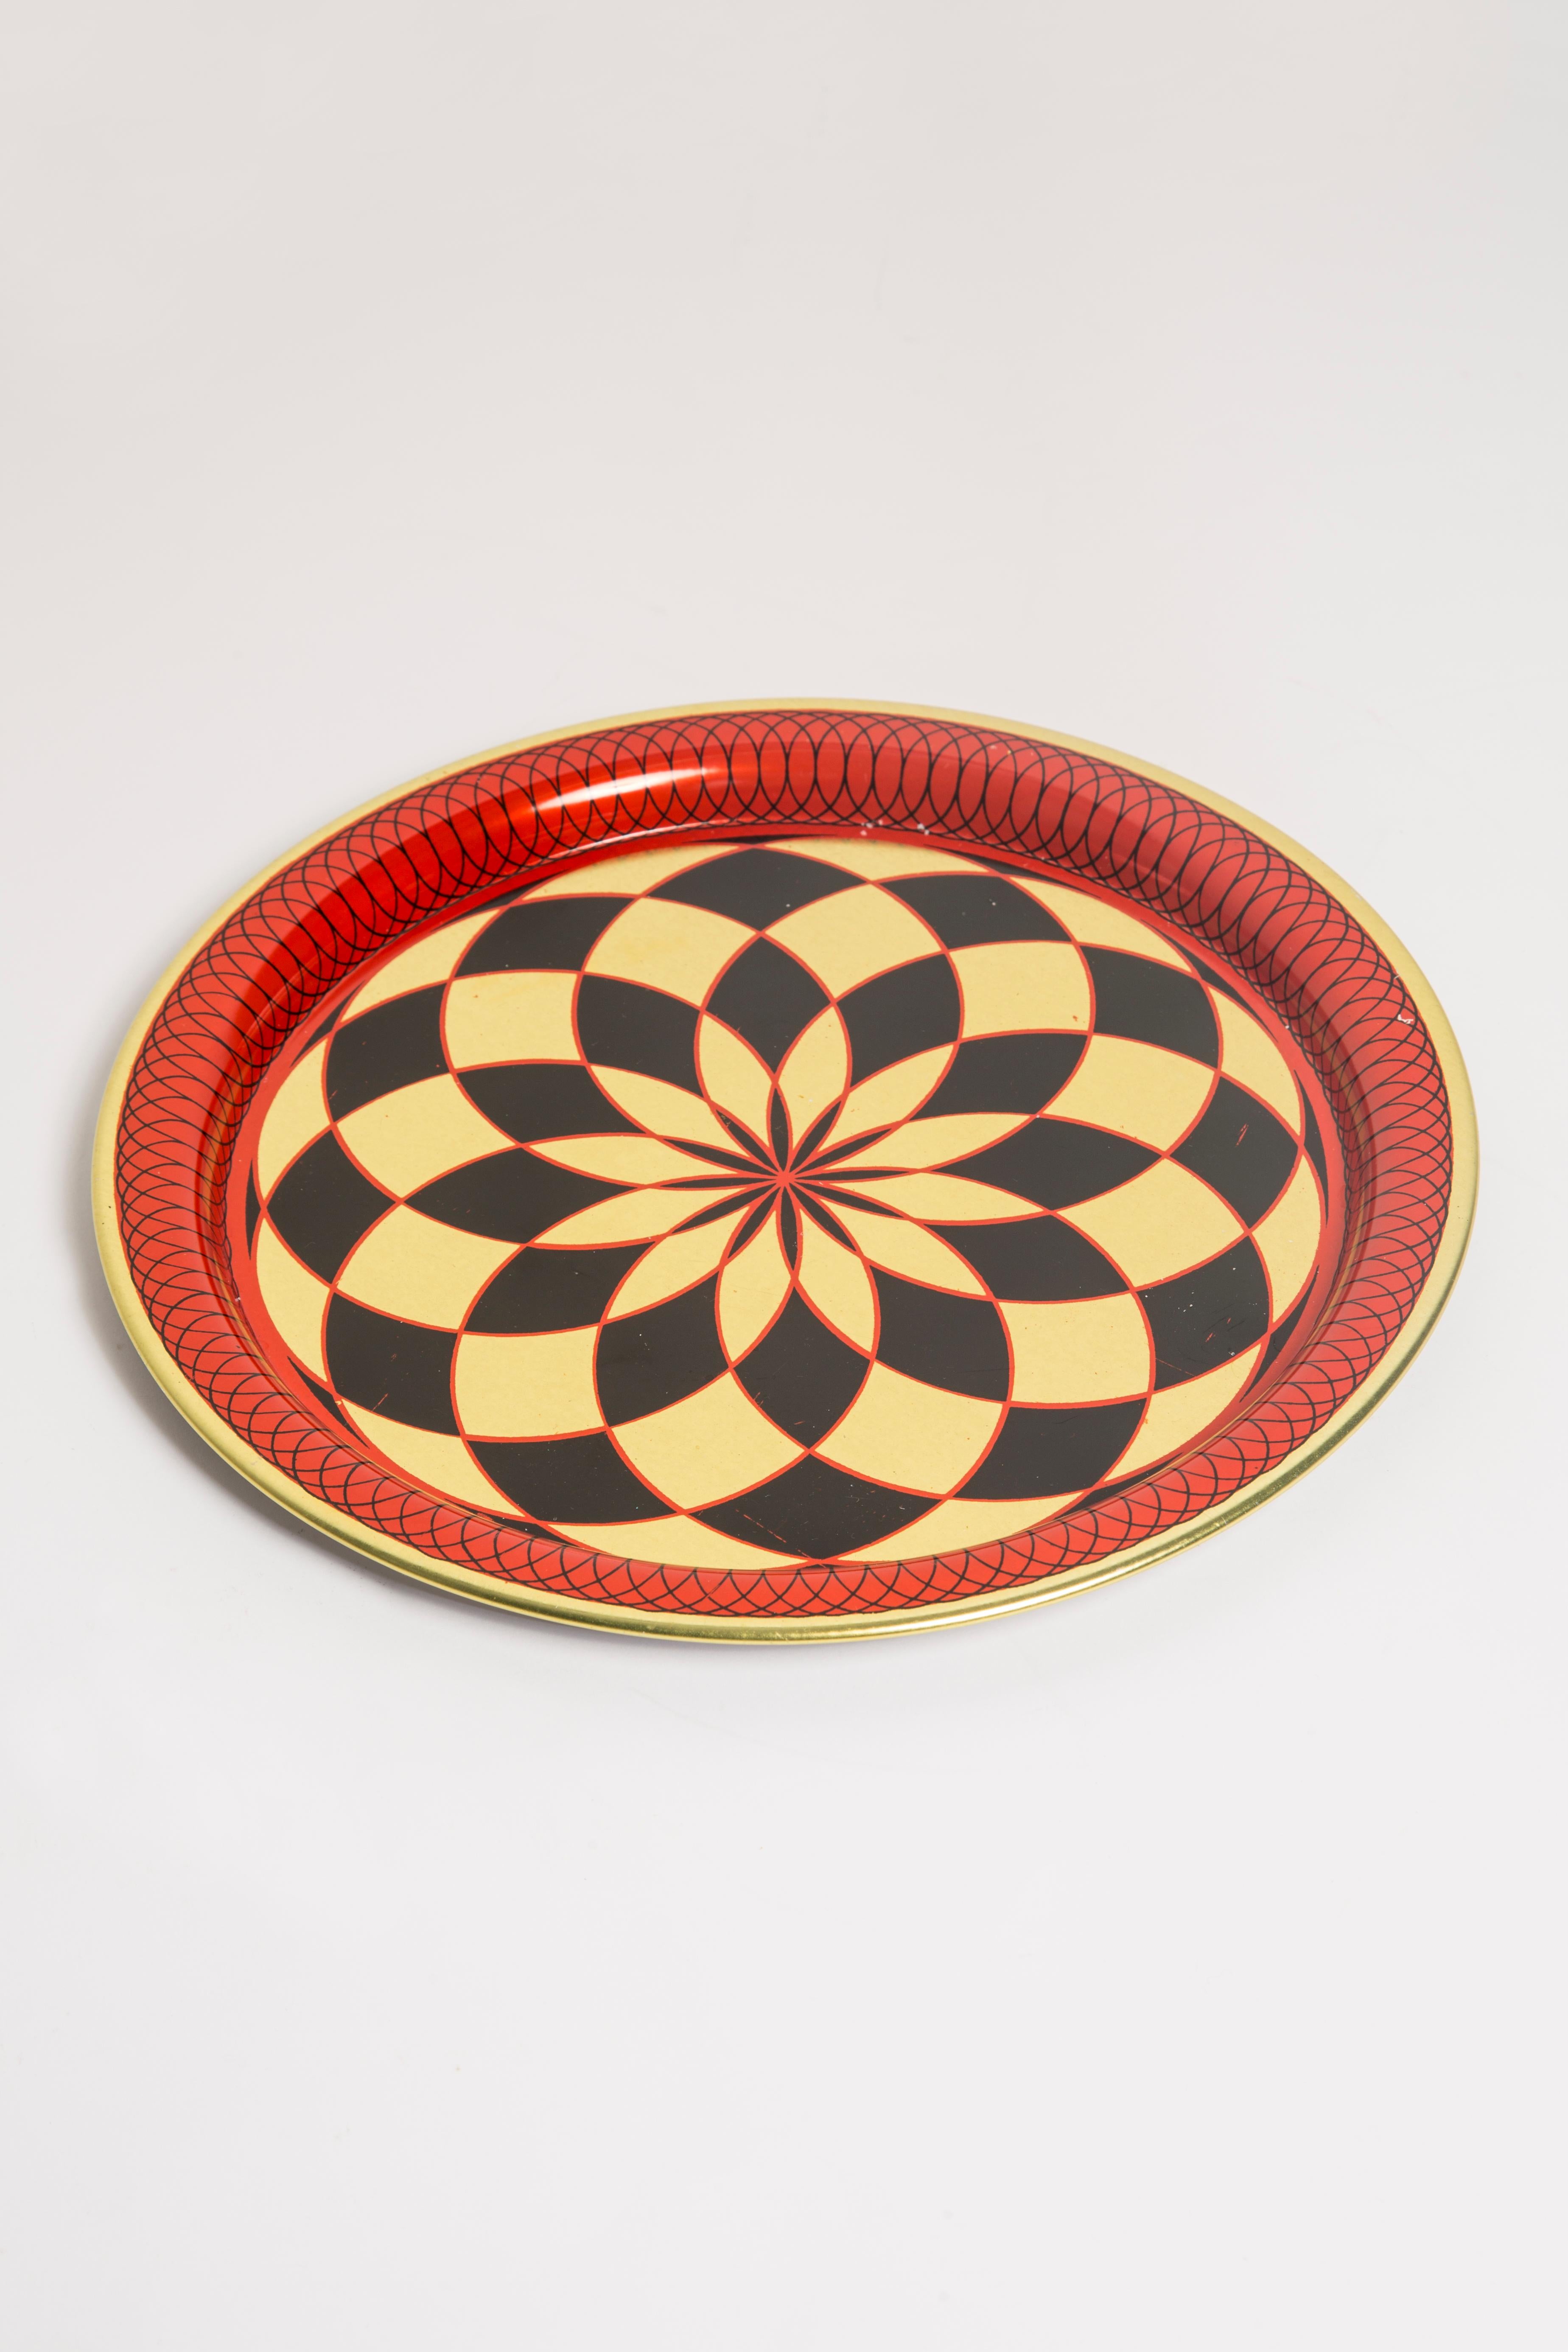 Midcentury Vintage Red Black and Gold Decorative Metal Plate, Poland, 1960s For Sale 1